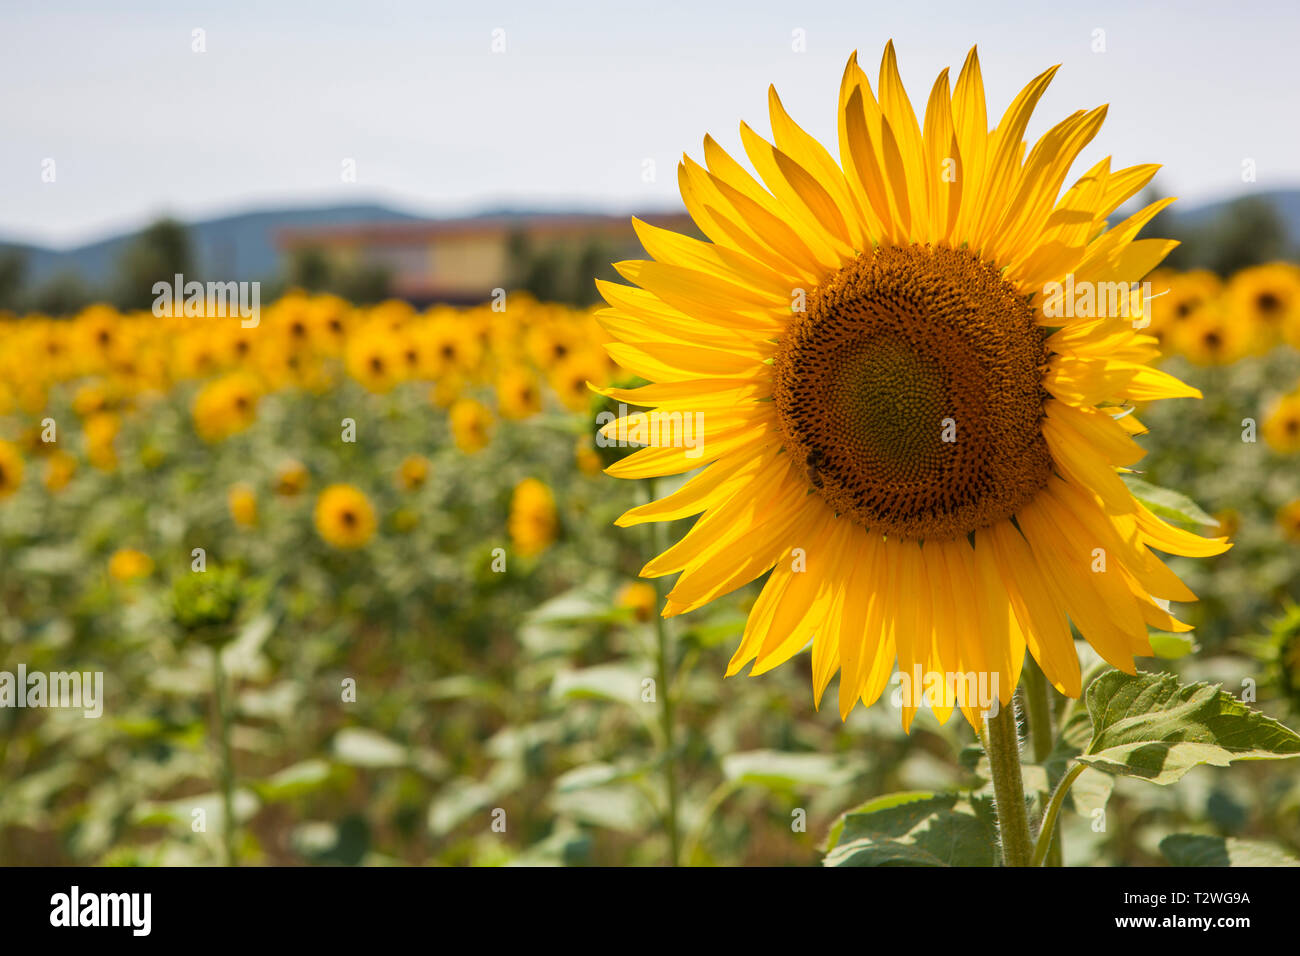 A sunflower blooming in a sunflower patch Stock Photo